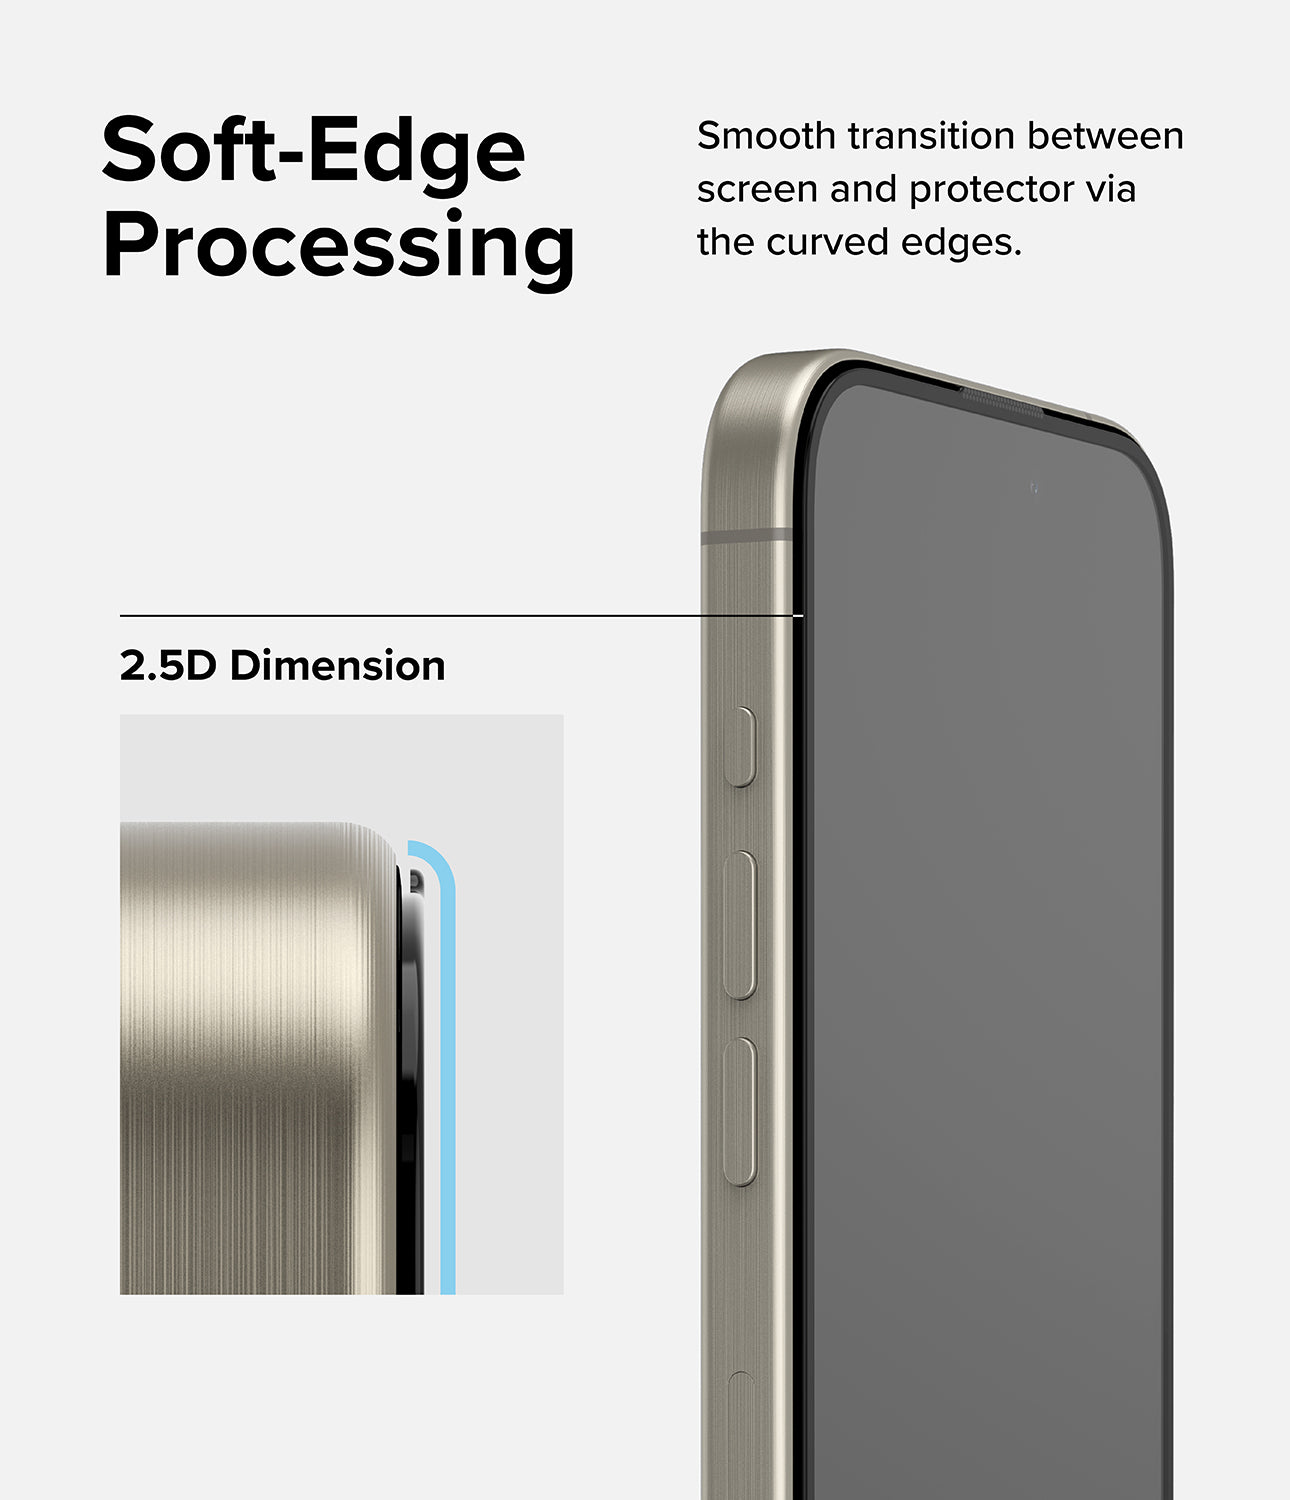 iPhone 15 Pro Screen Protector | Easy Slide Tempered Glass- Soft-Edge Processing. Smooth transition between screen and protector via the curved edges.